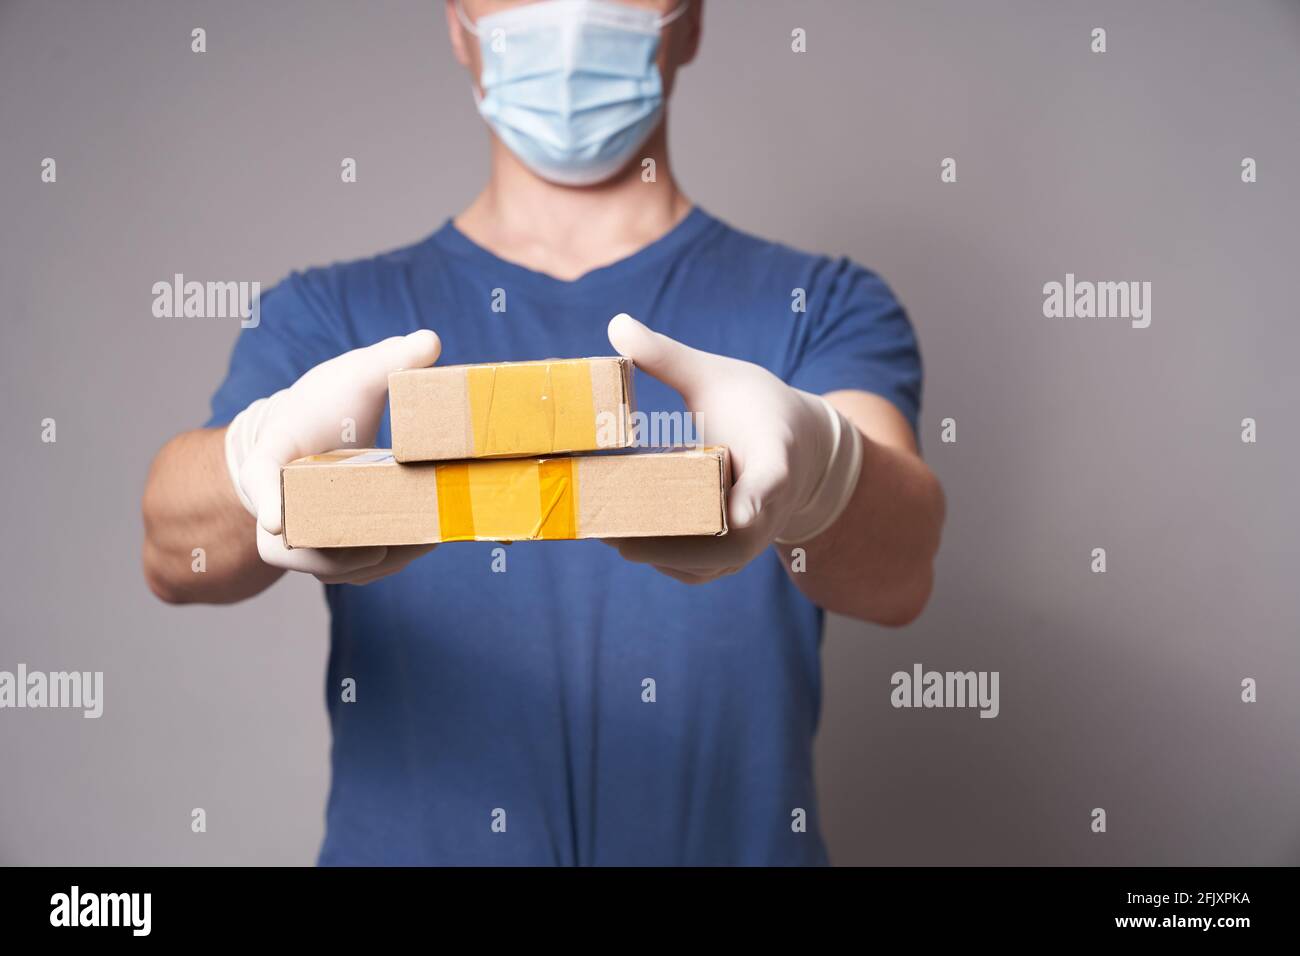 Delivery Man Wearing Protective Mask And Rubber Gloves Stock Photo